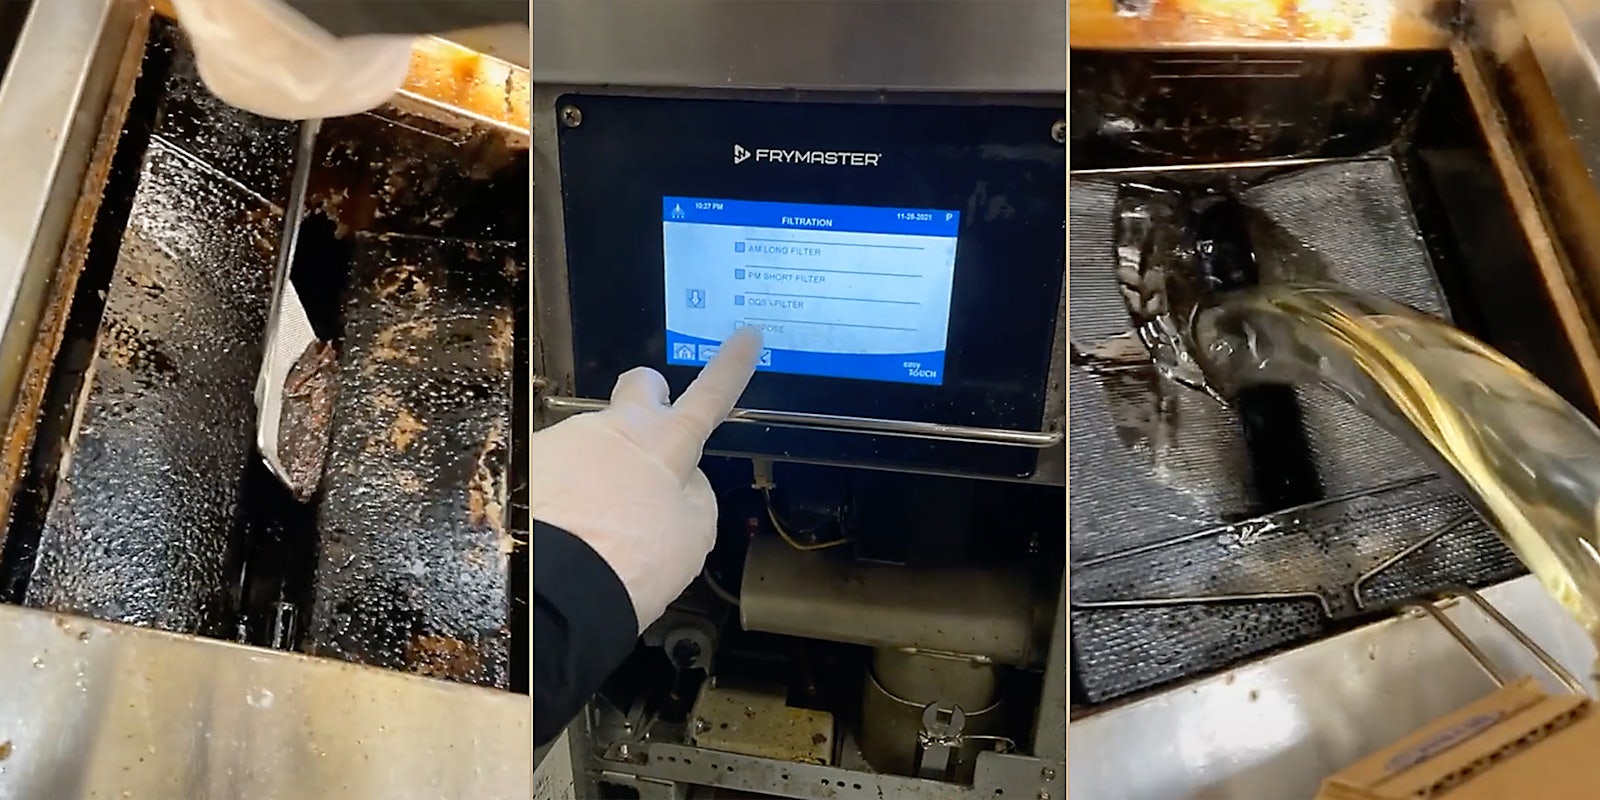 Oil being changed in a fryer.